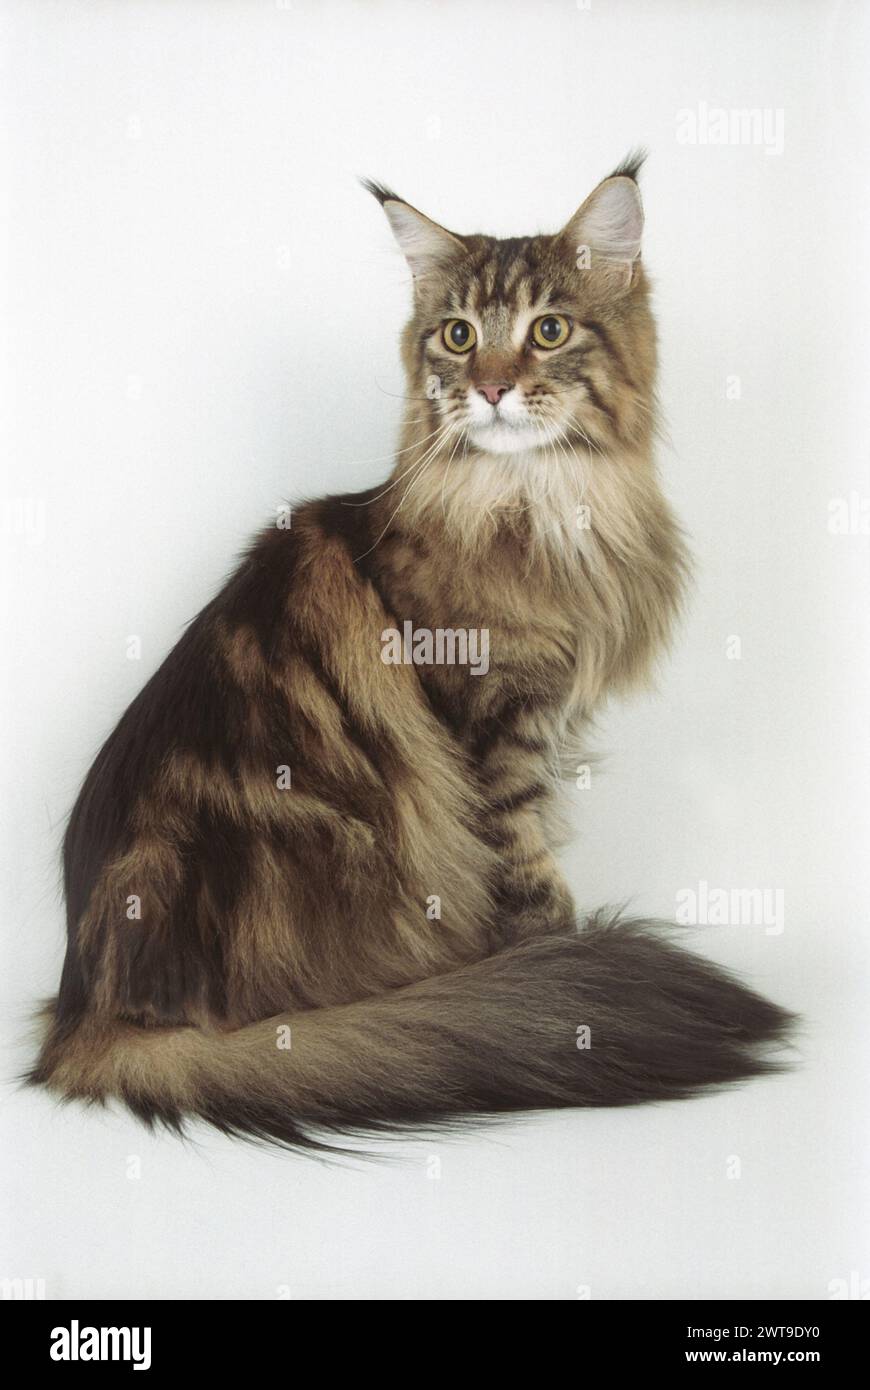 Alert Adult Maine Coon Brown Tabby Sitting Up on a White Background Stock Photo